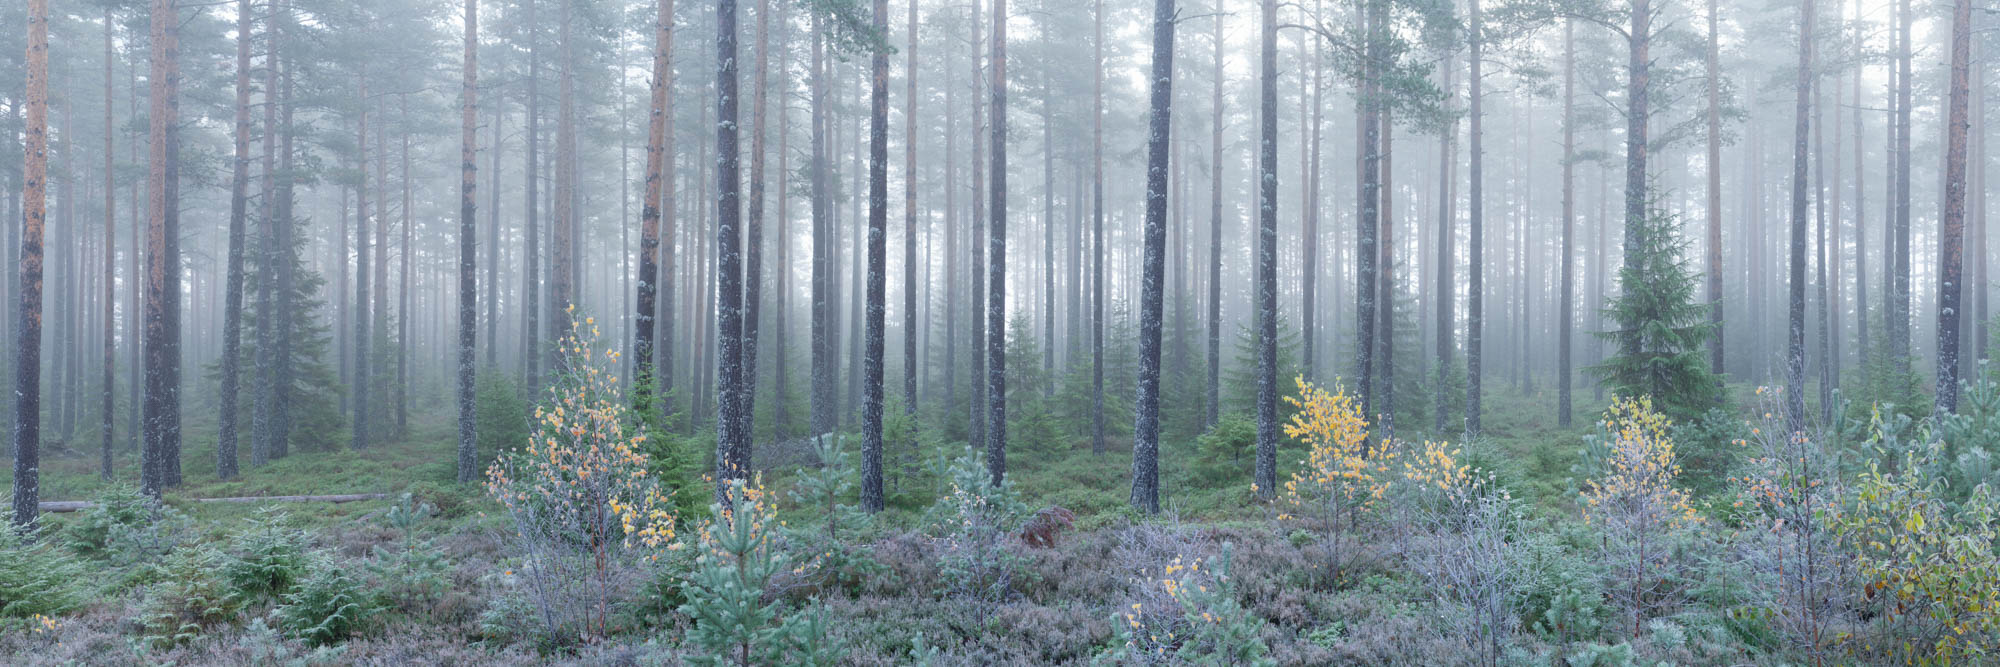 Panorama of a misty forest in Norway